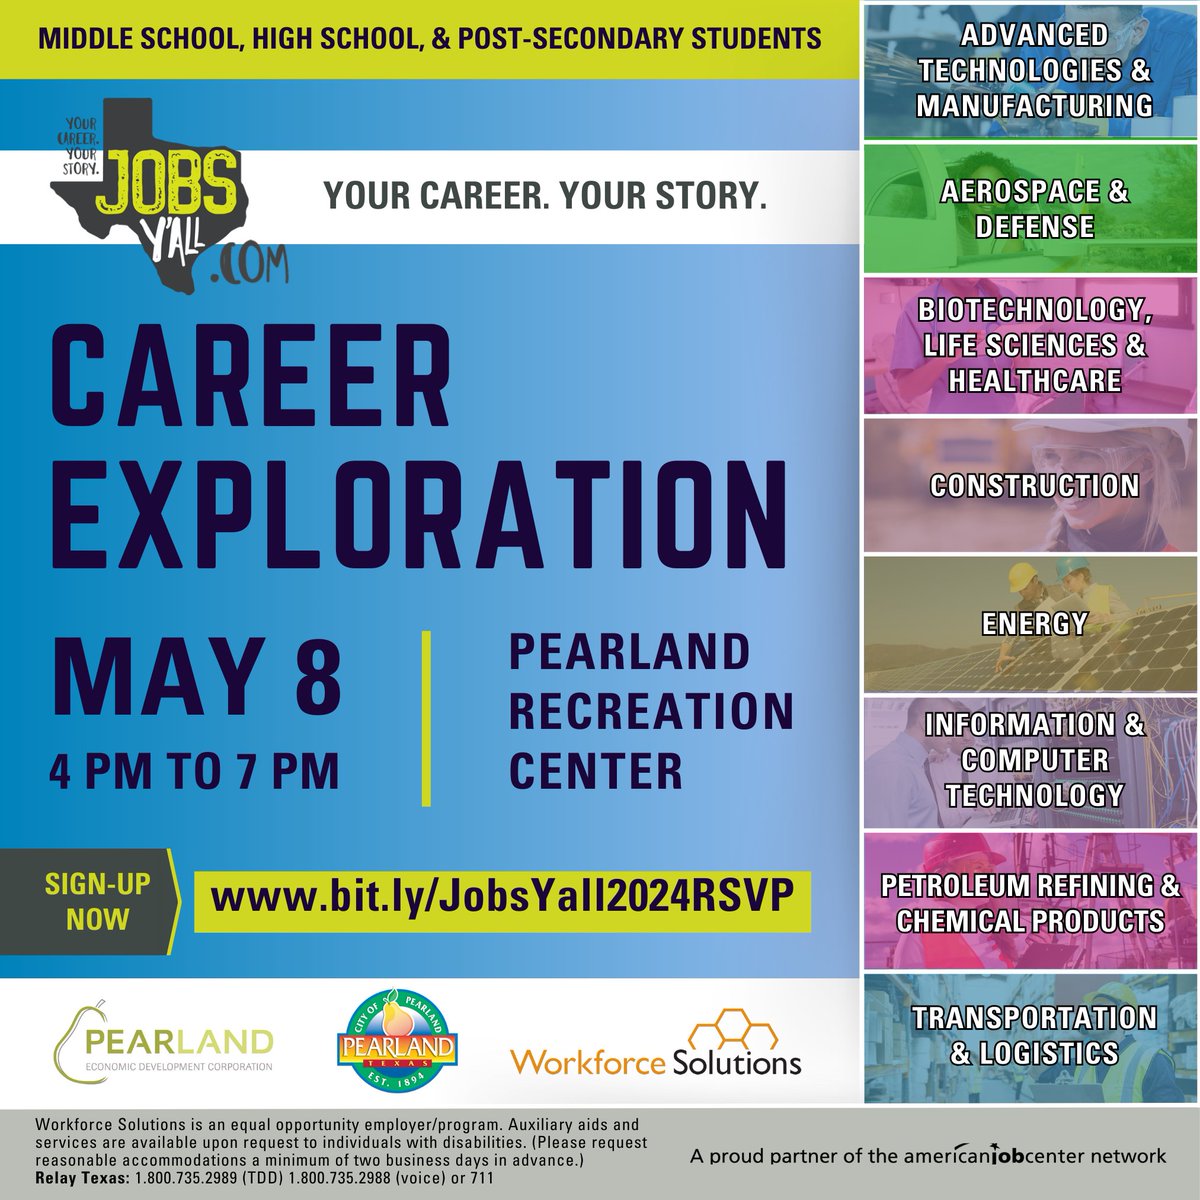 🚀 Unlock your career potential at Pearland Recreation Center (4141 Bailey Rd., Pearland, TX 77584) on May 8! Jobs Y'all wants to help you dive into thriving Texas industries like Biotech, Healthcare, IT, and more! Engage with experts, explore pathways, and ignite your future.…